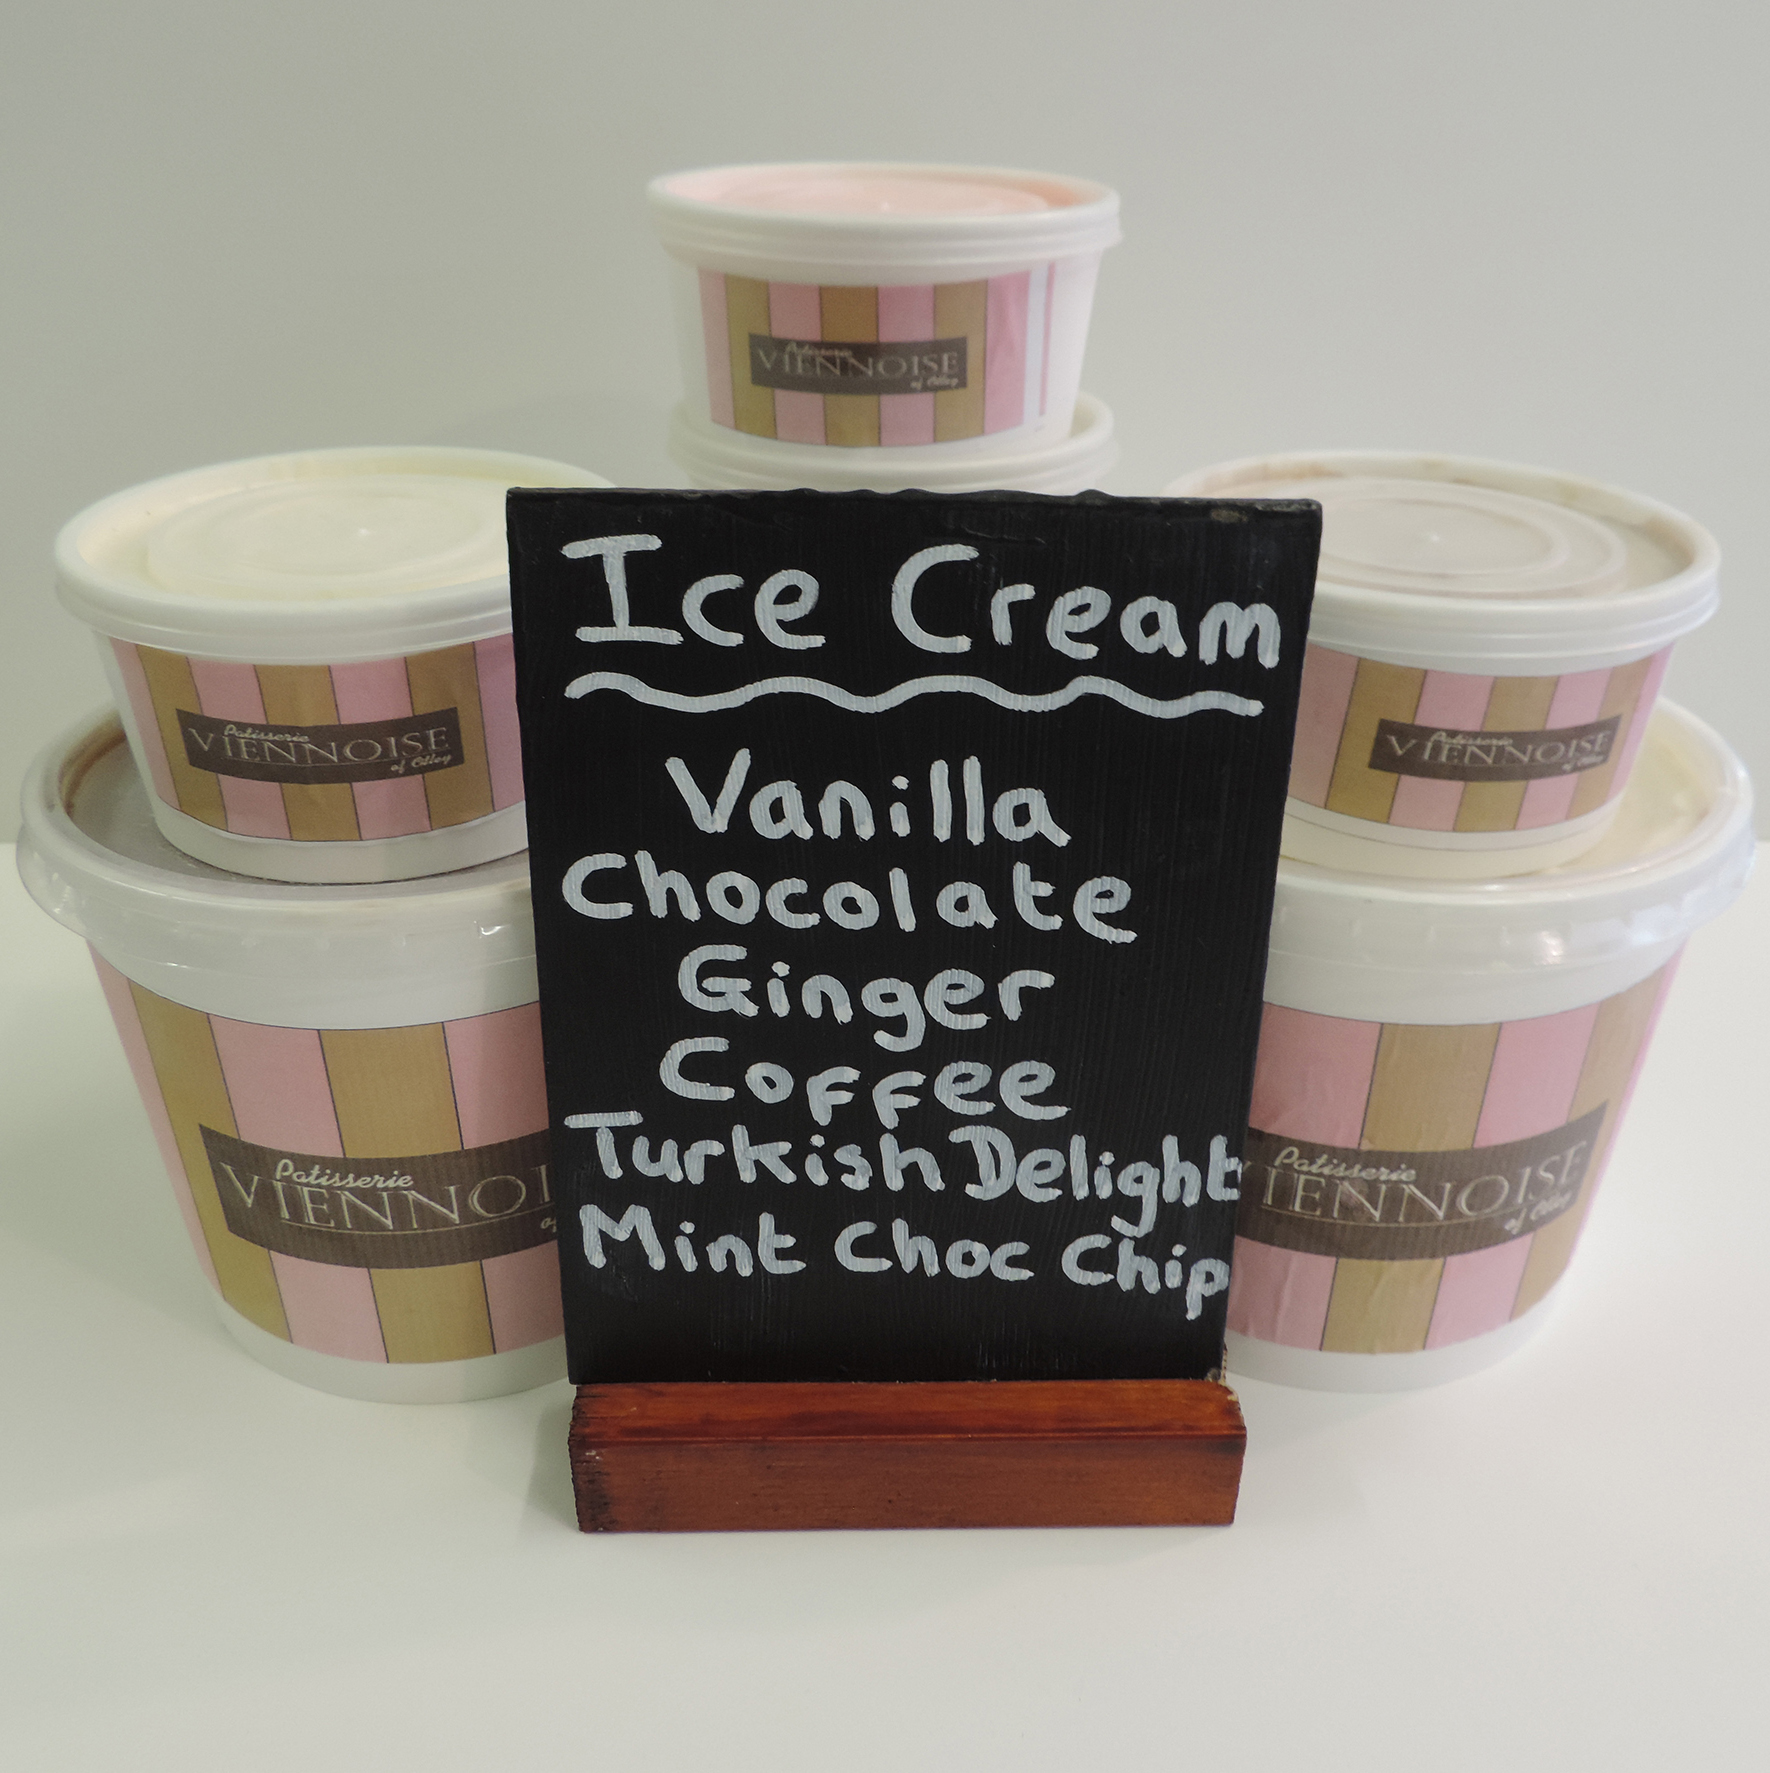 Selection of ice cream available at Patisserie Viennoise Otley